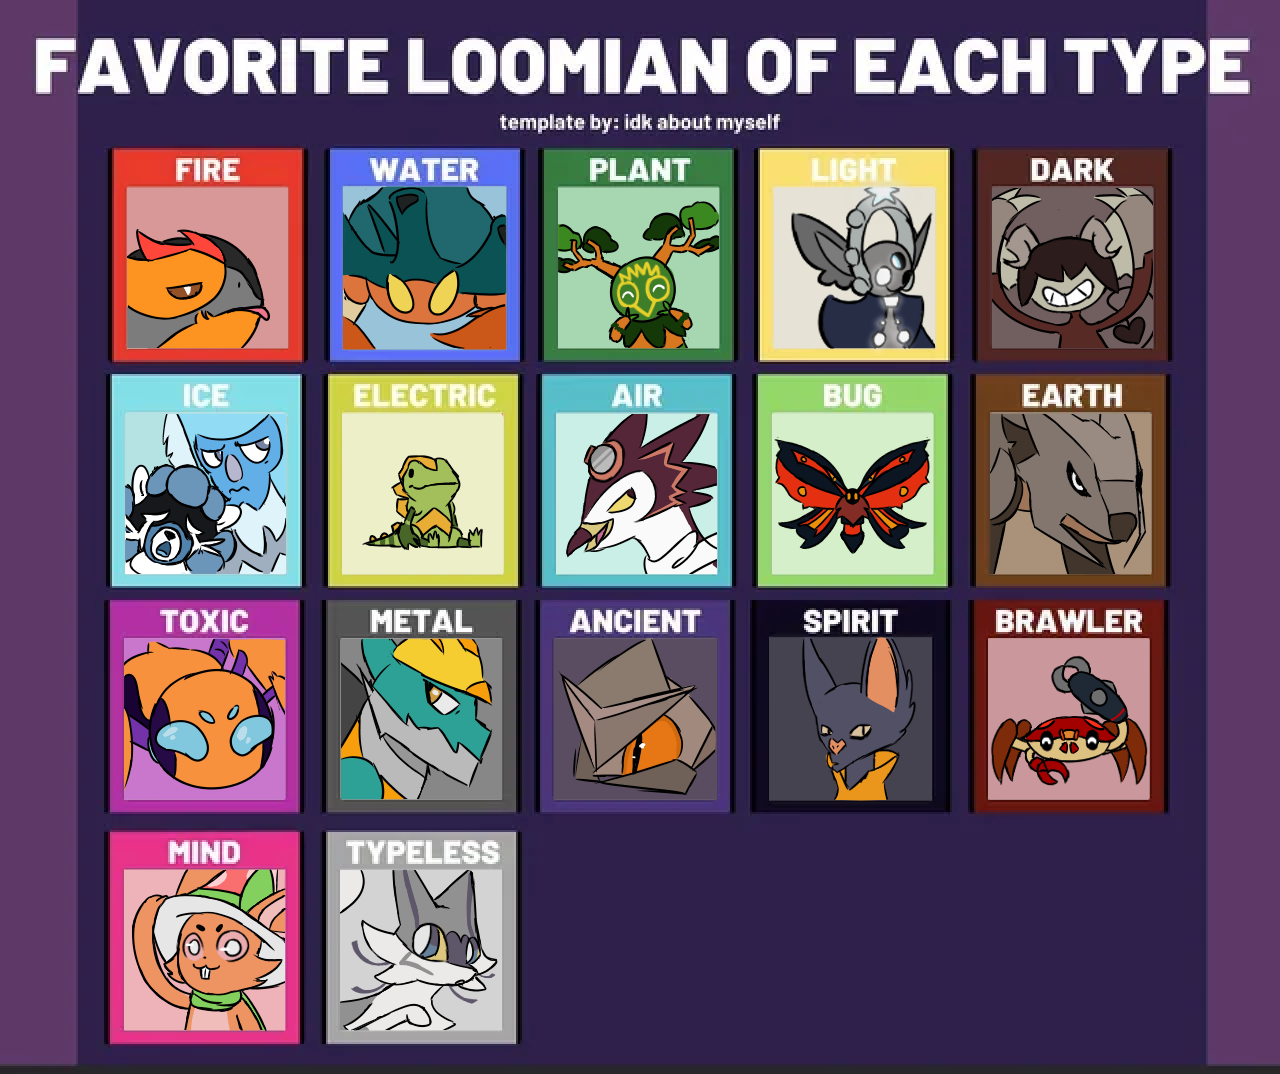 Every Loomian Legacy Type Explained! 